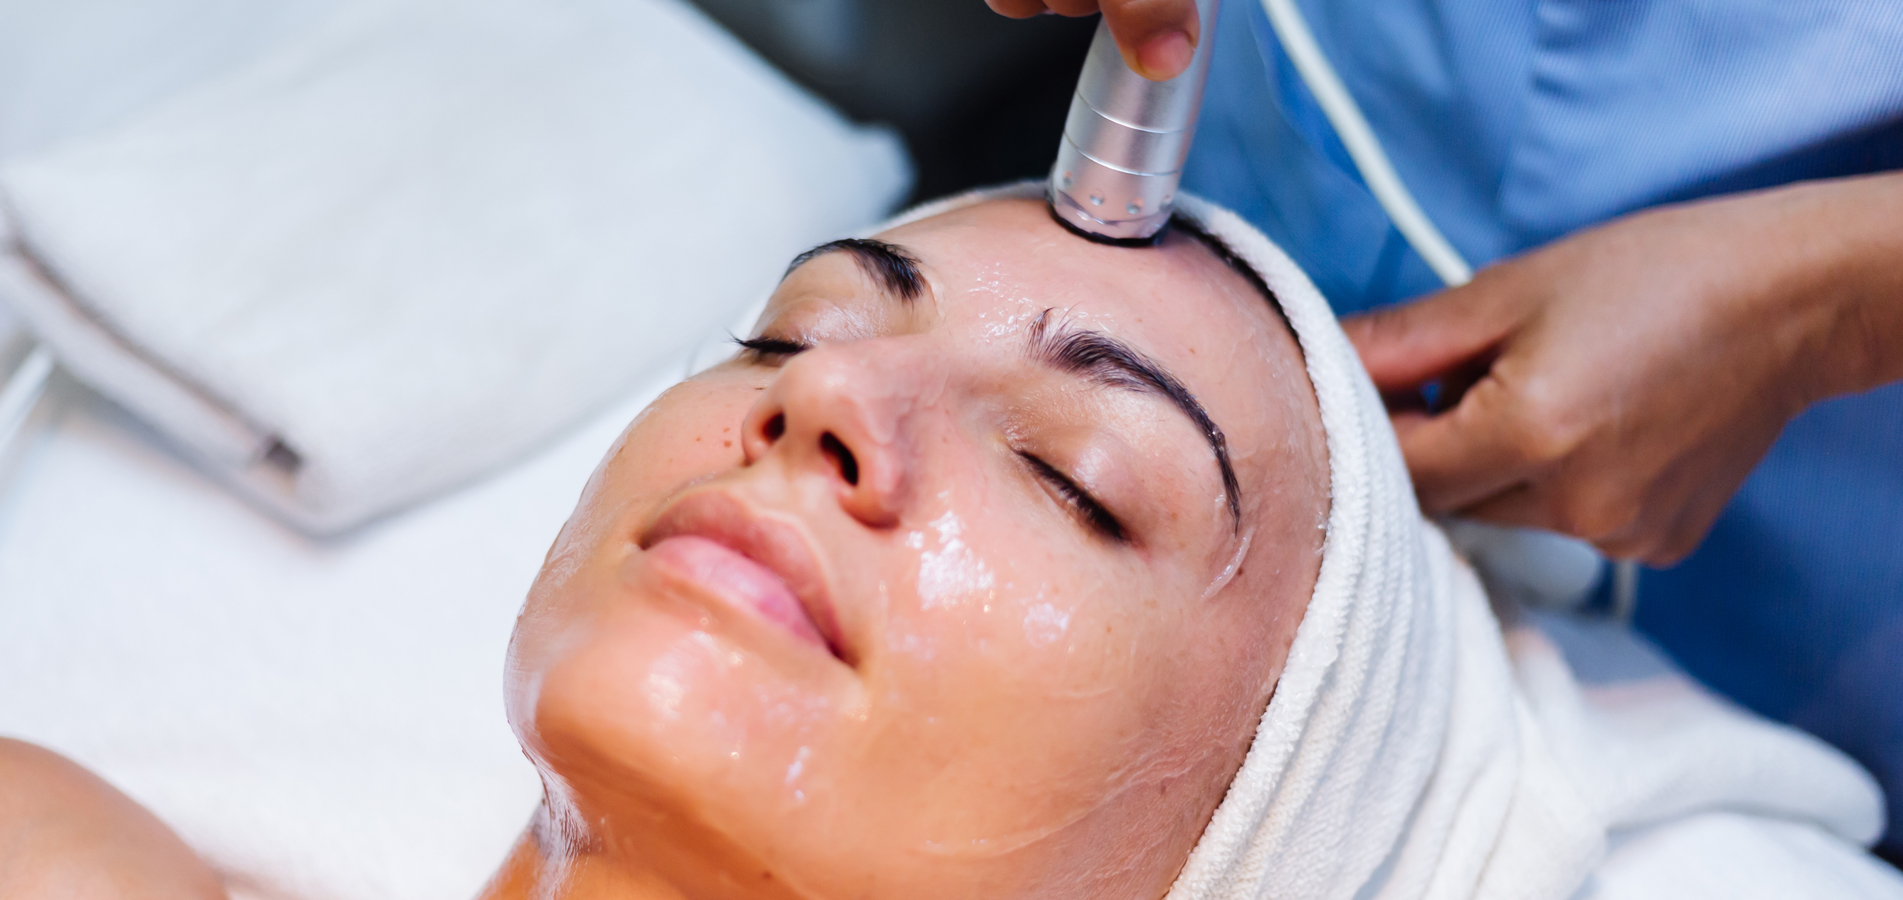 Chemical glycolic skin peel course £129